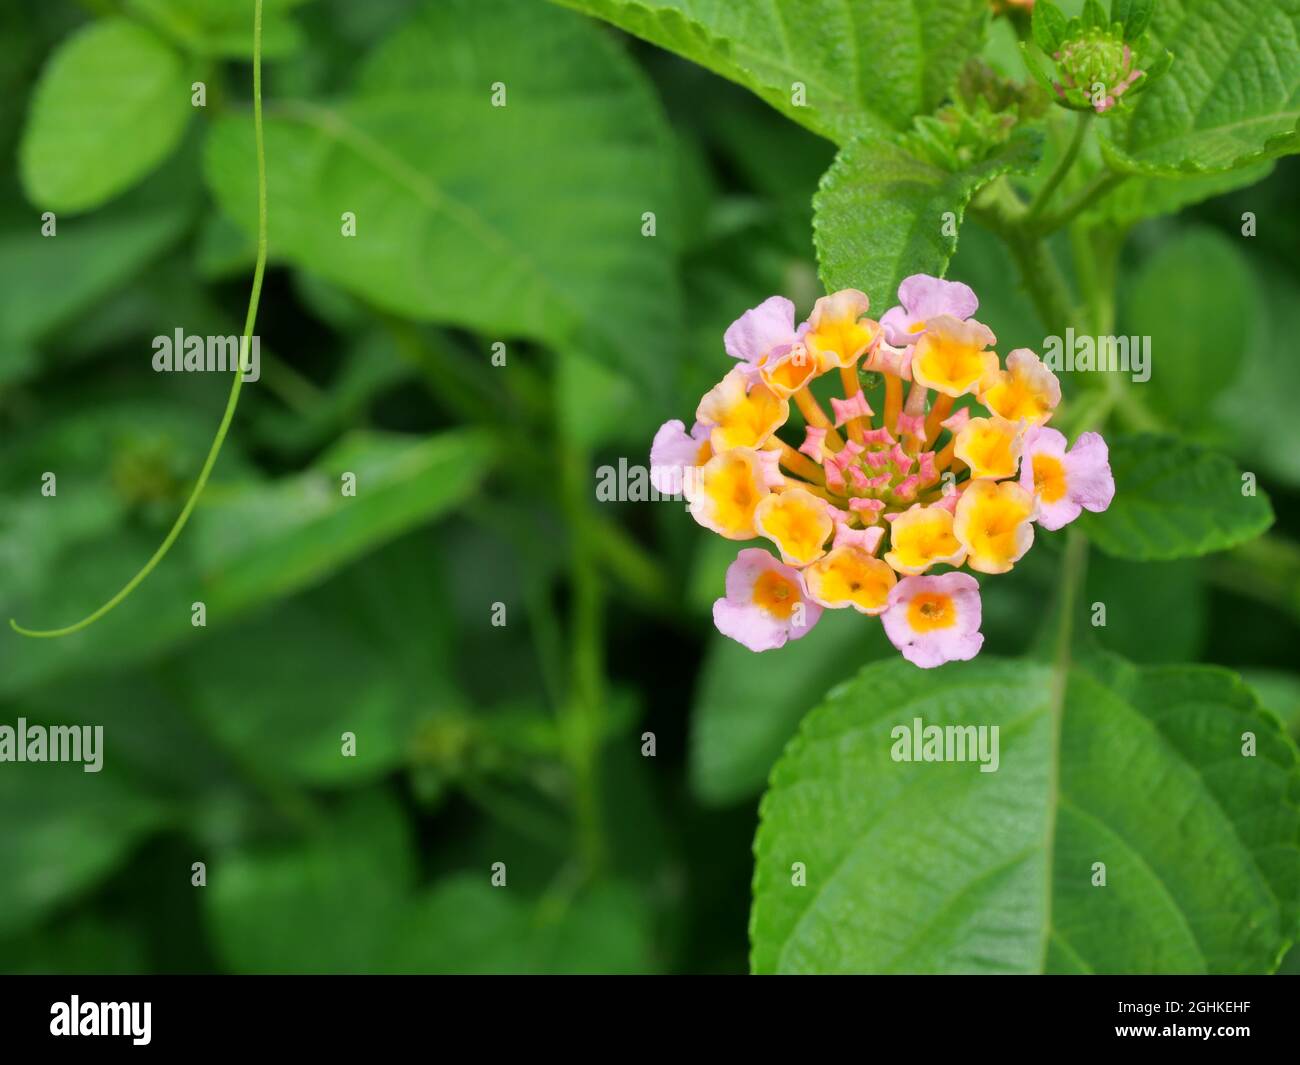 West Indian Lantana blossom ( Lantana camara ) with natural  green background, Group of small flowers with pink petals and yellow pollen Stock Photo